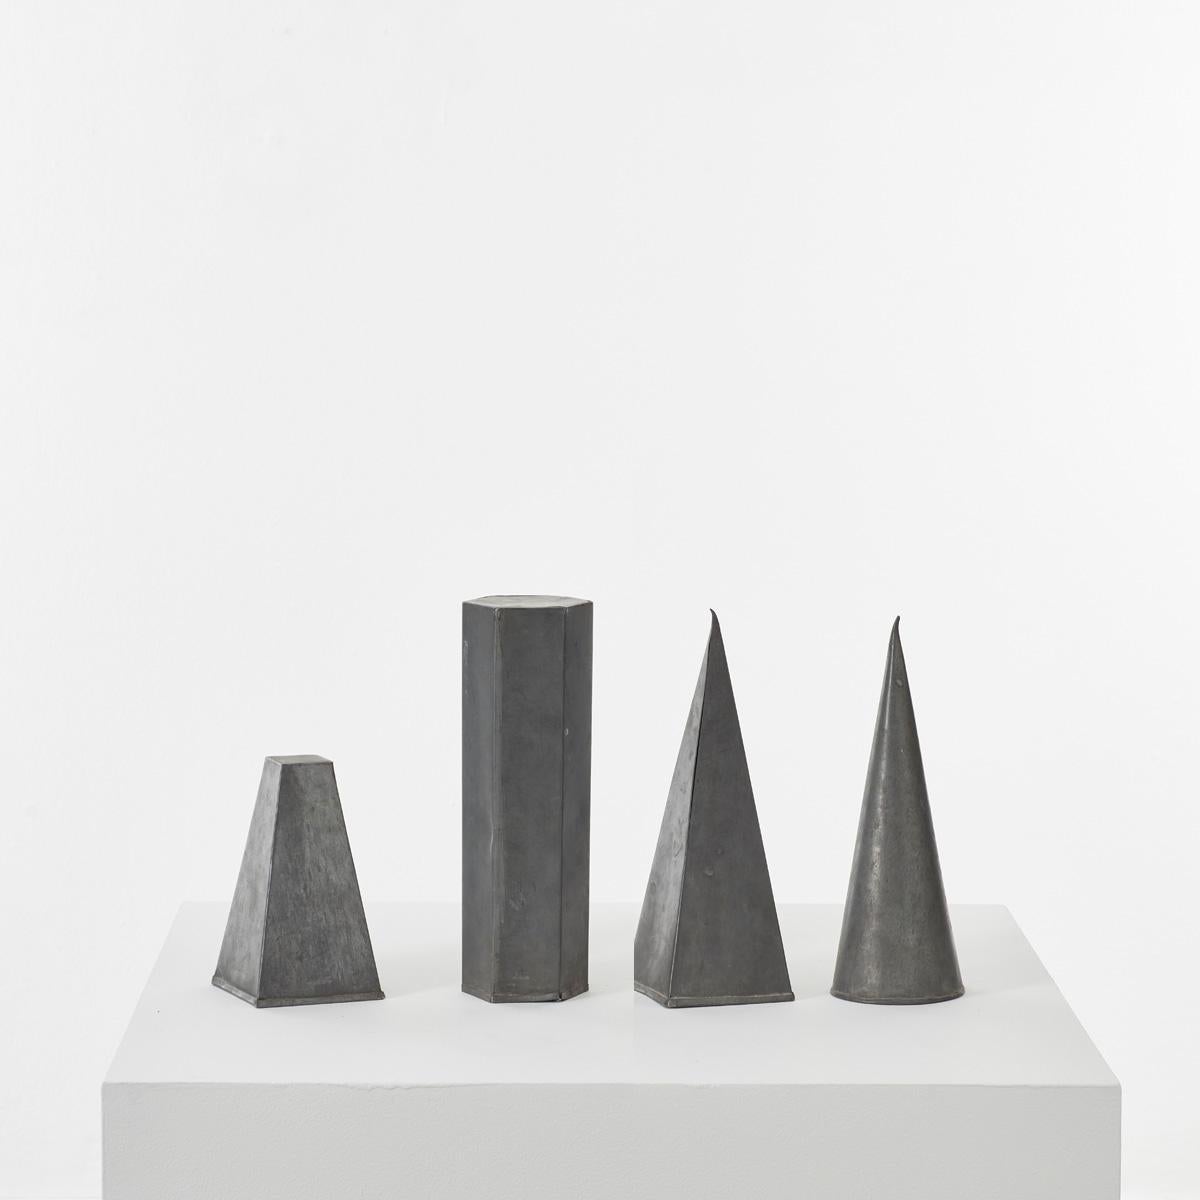 This set of four geometric shapes have been handcrafted from zinc plate. Can be used to add some interesting geometry to a mantelpiece or shelf. Each one has a lovely character showing traces of past use.